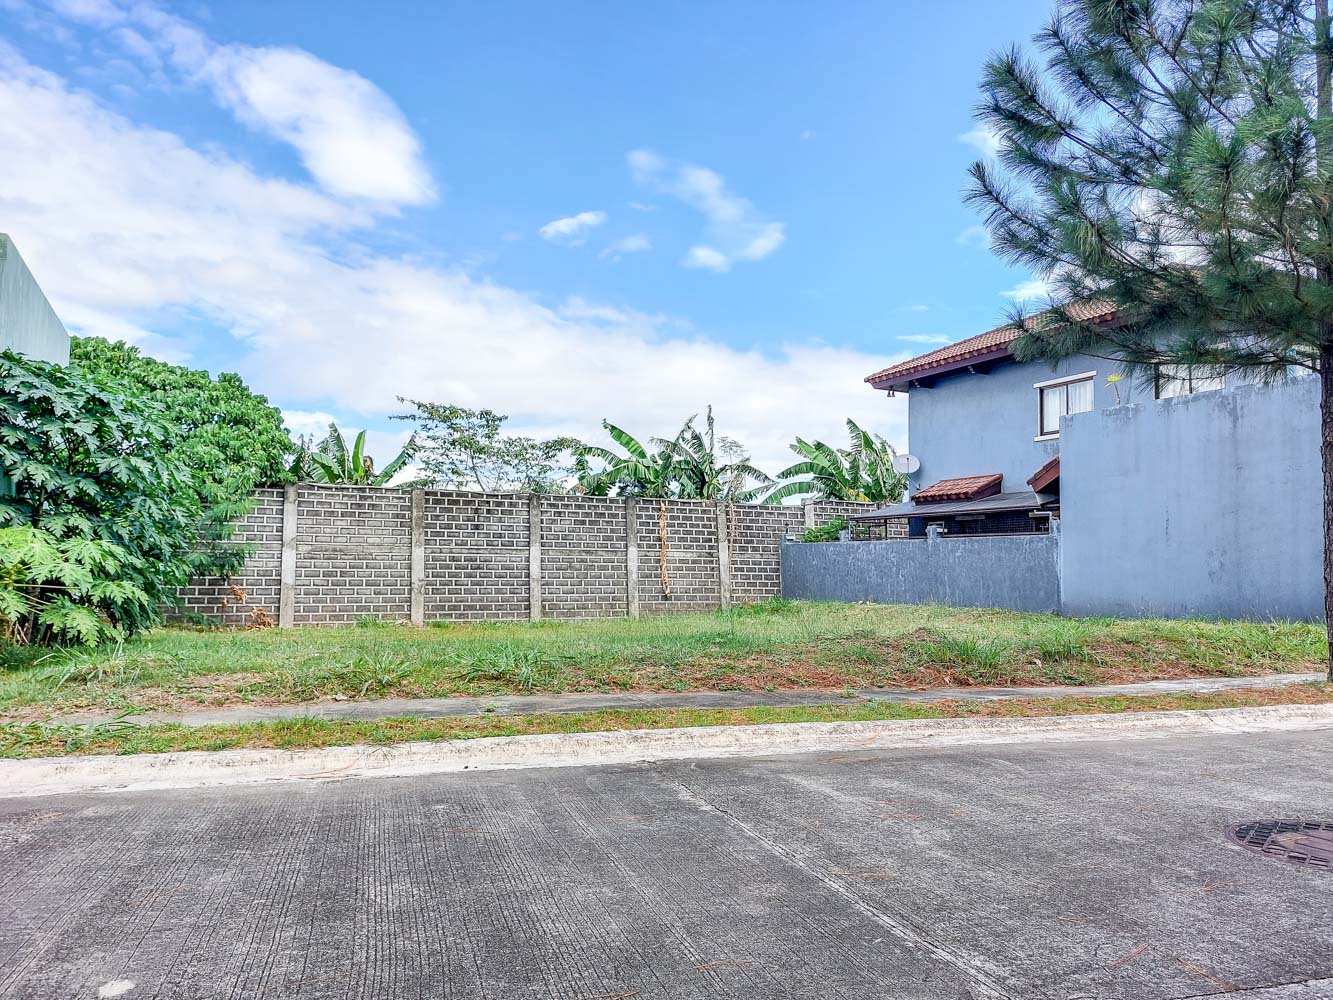 Residential Lot for Sale 319 sqm Located in Portofino Heights, Las Pinas City corner of Bacoor Cavite